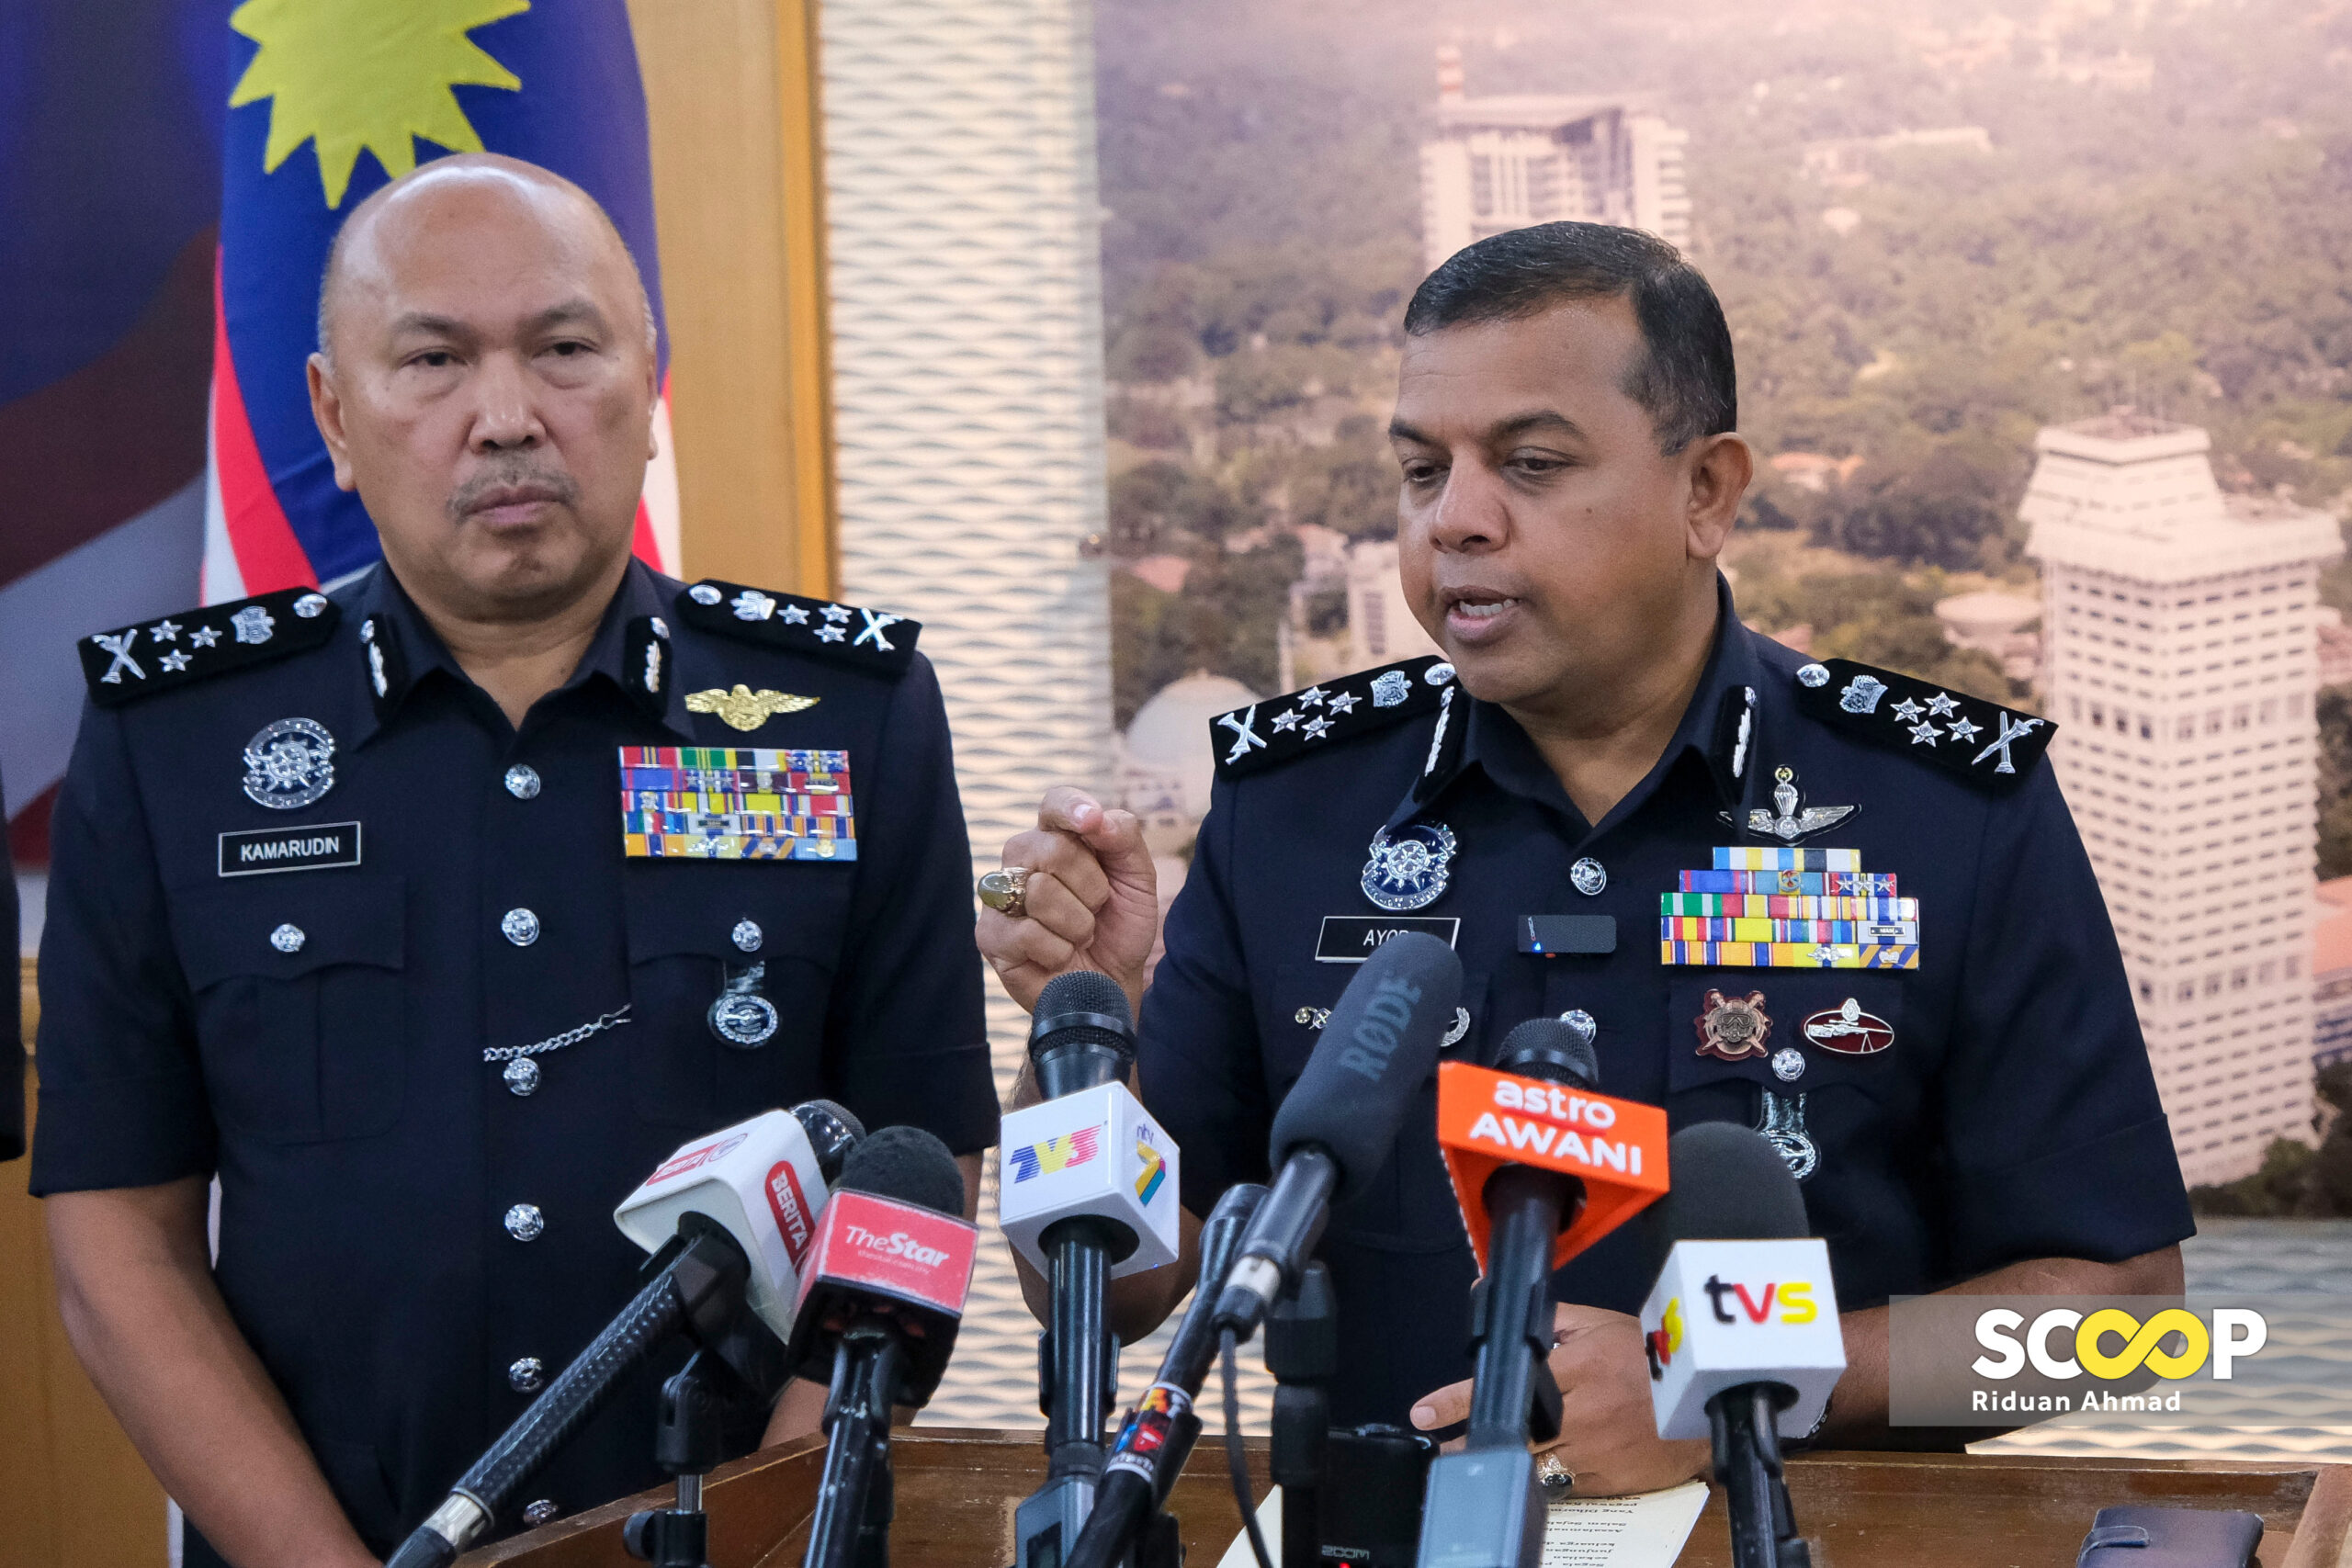 [UPDATED] No info on extradition of Bali bombers from Guantanamo Bay: deputy IGP